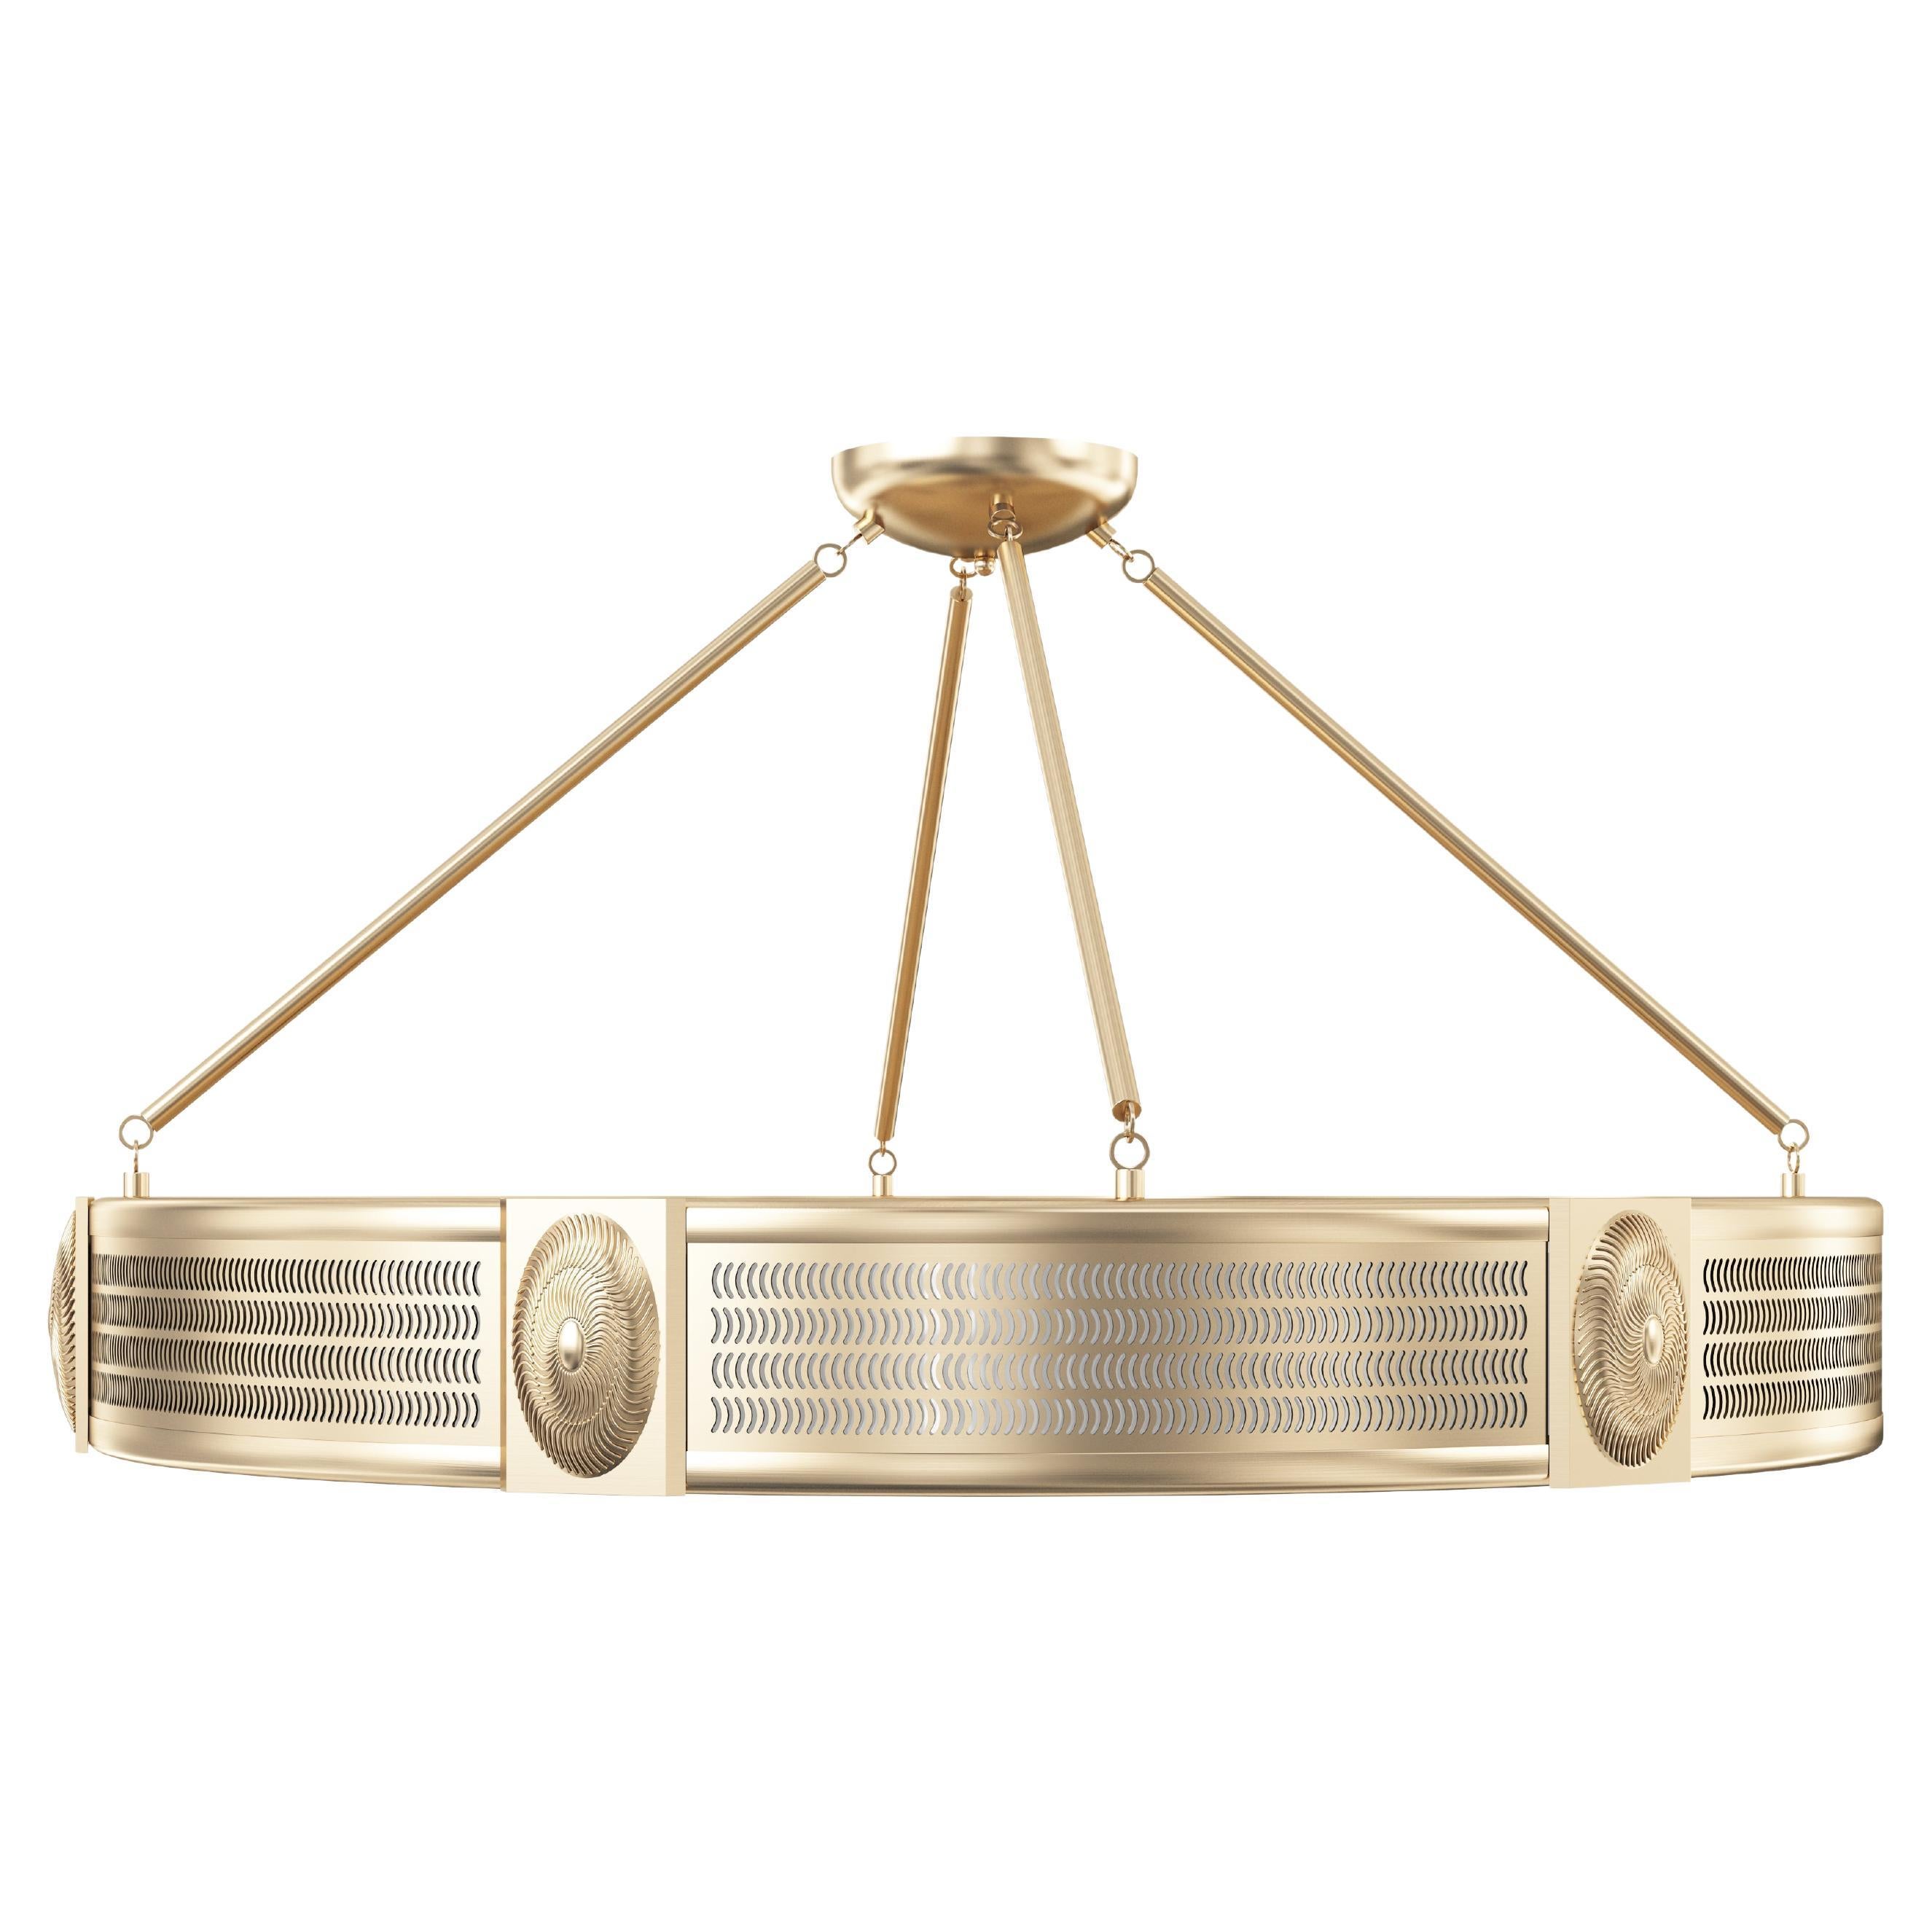 A new, contemporary pendant ceiling light with comma-shaped cutouts emitting light through opal lucite diffusers on the sides. The underside with optical Tourbillon Swirl design in etched brass over lucite. Secured with brass finial concealing 10